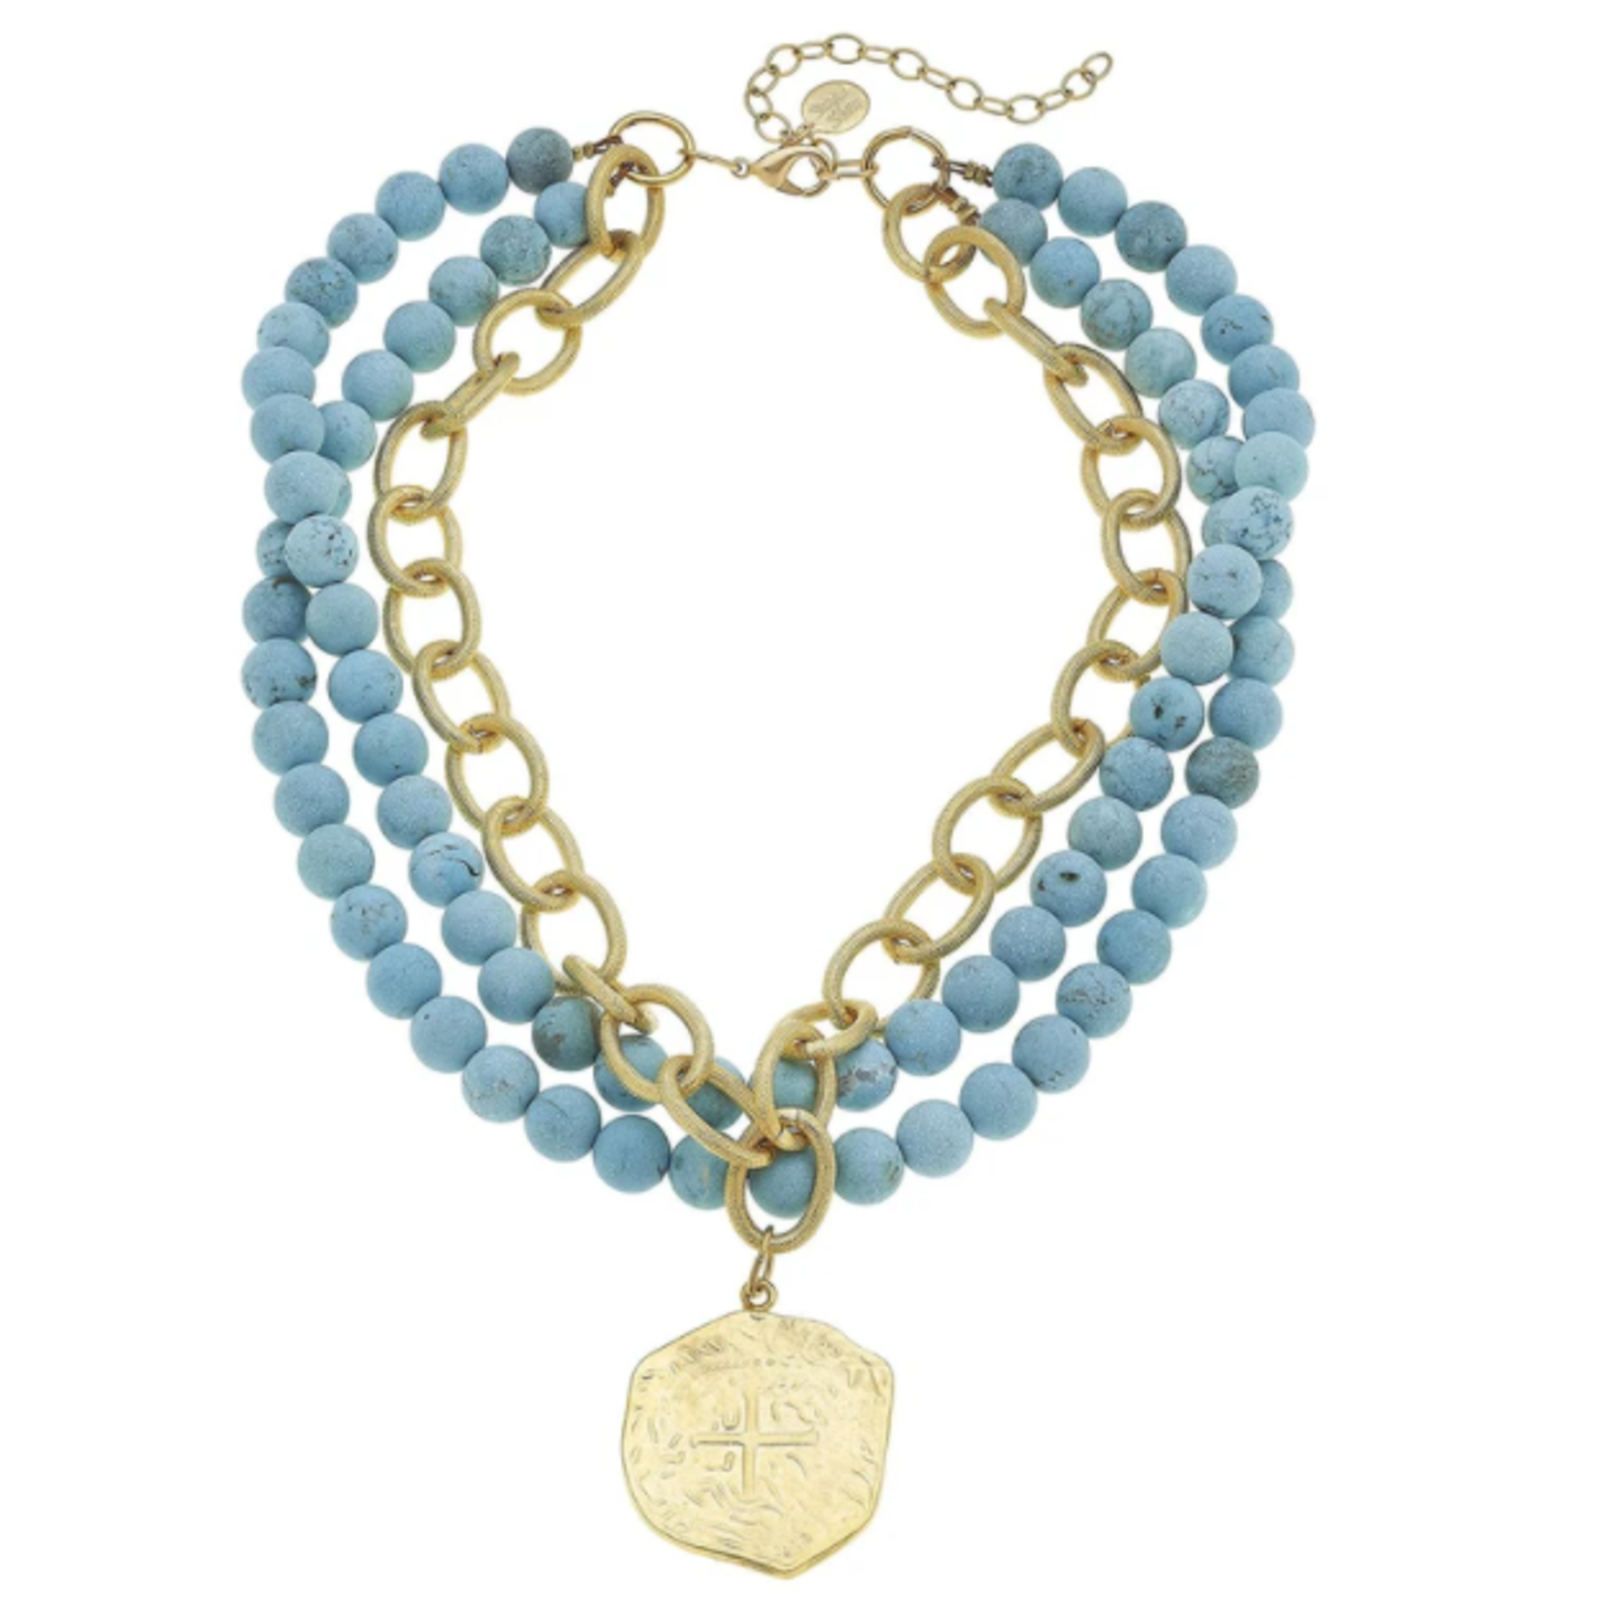 Susan Shaw Gold Coin on 3 Row Genuine Matte Turquoise Necklace  3666cr loading=